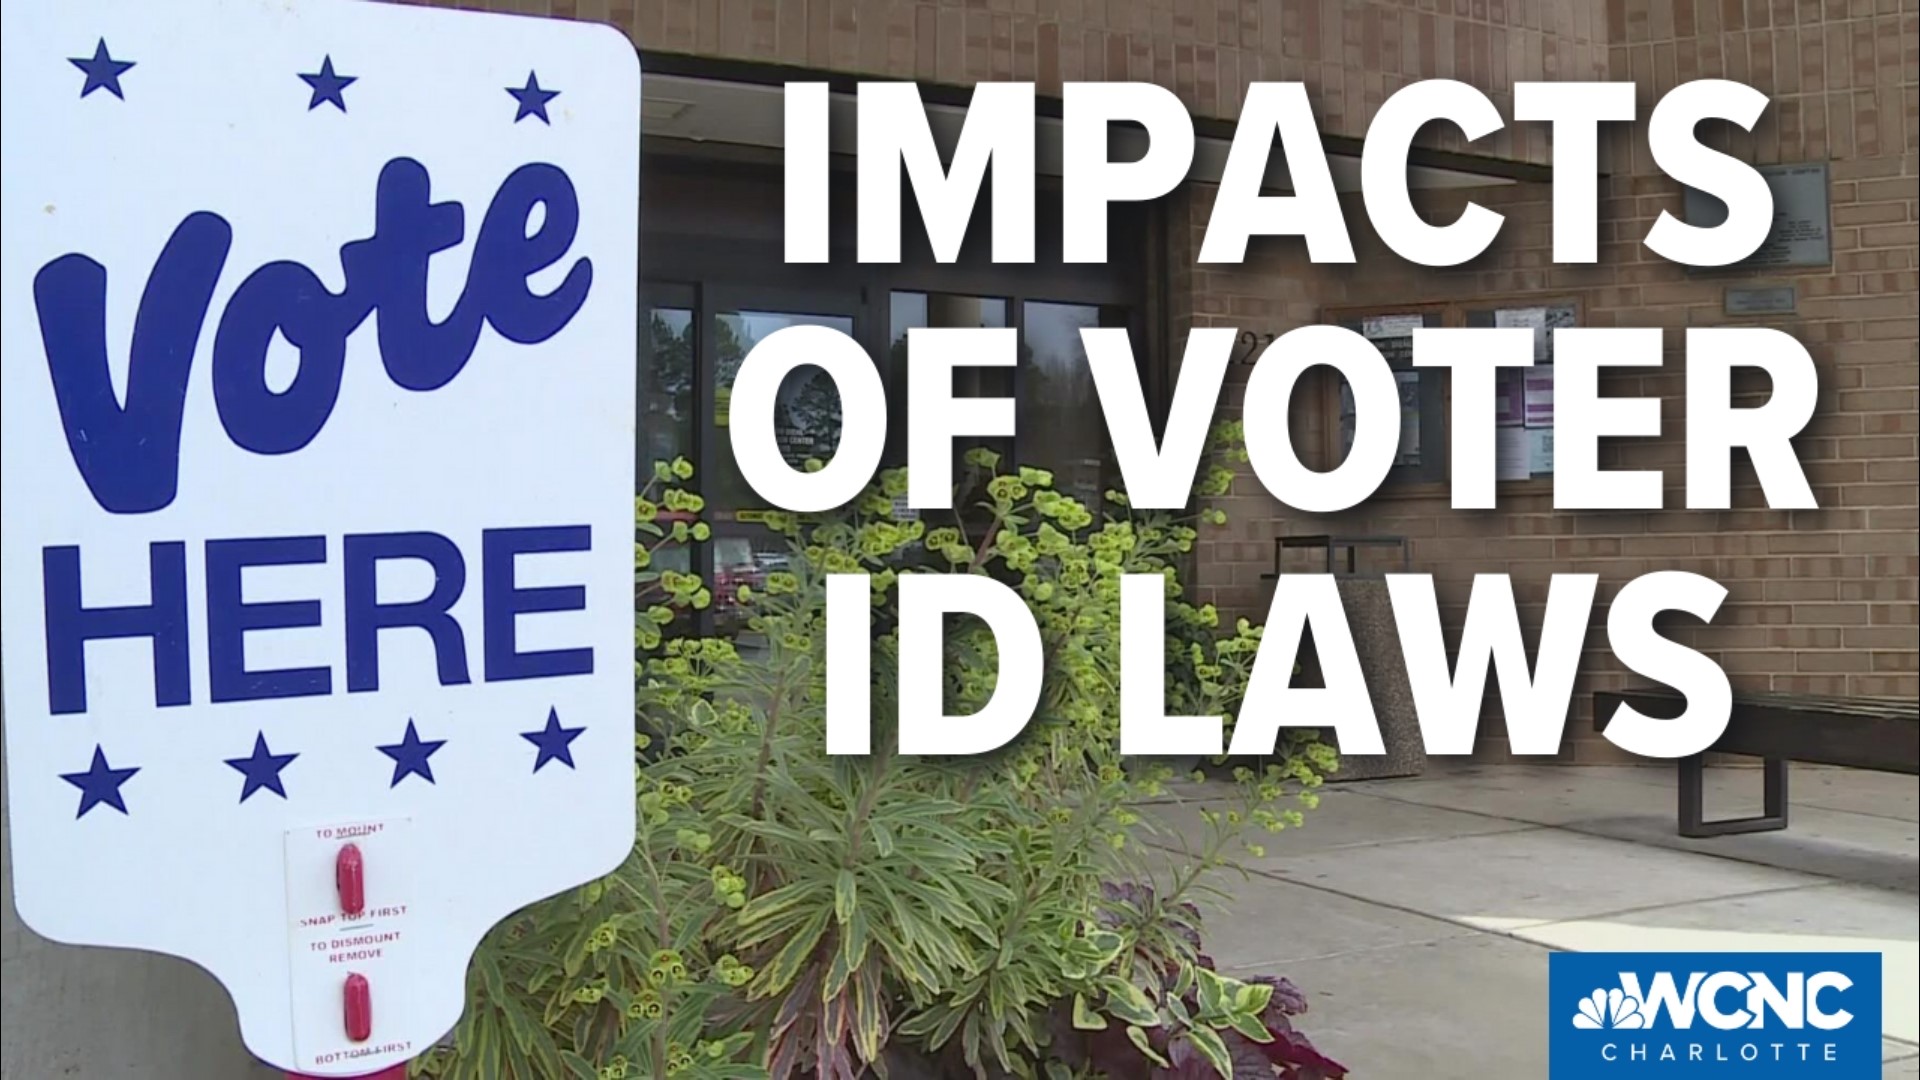 A hot topic here in the Tar Heel State is voter ID laws. Right now, those laws are in limbo and people do not need to show identification at the polls.